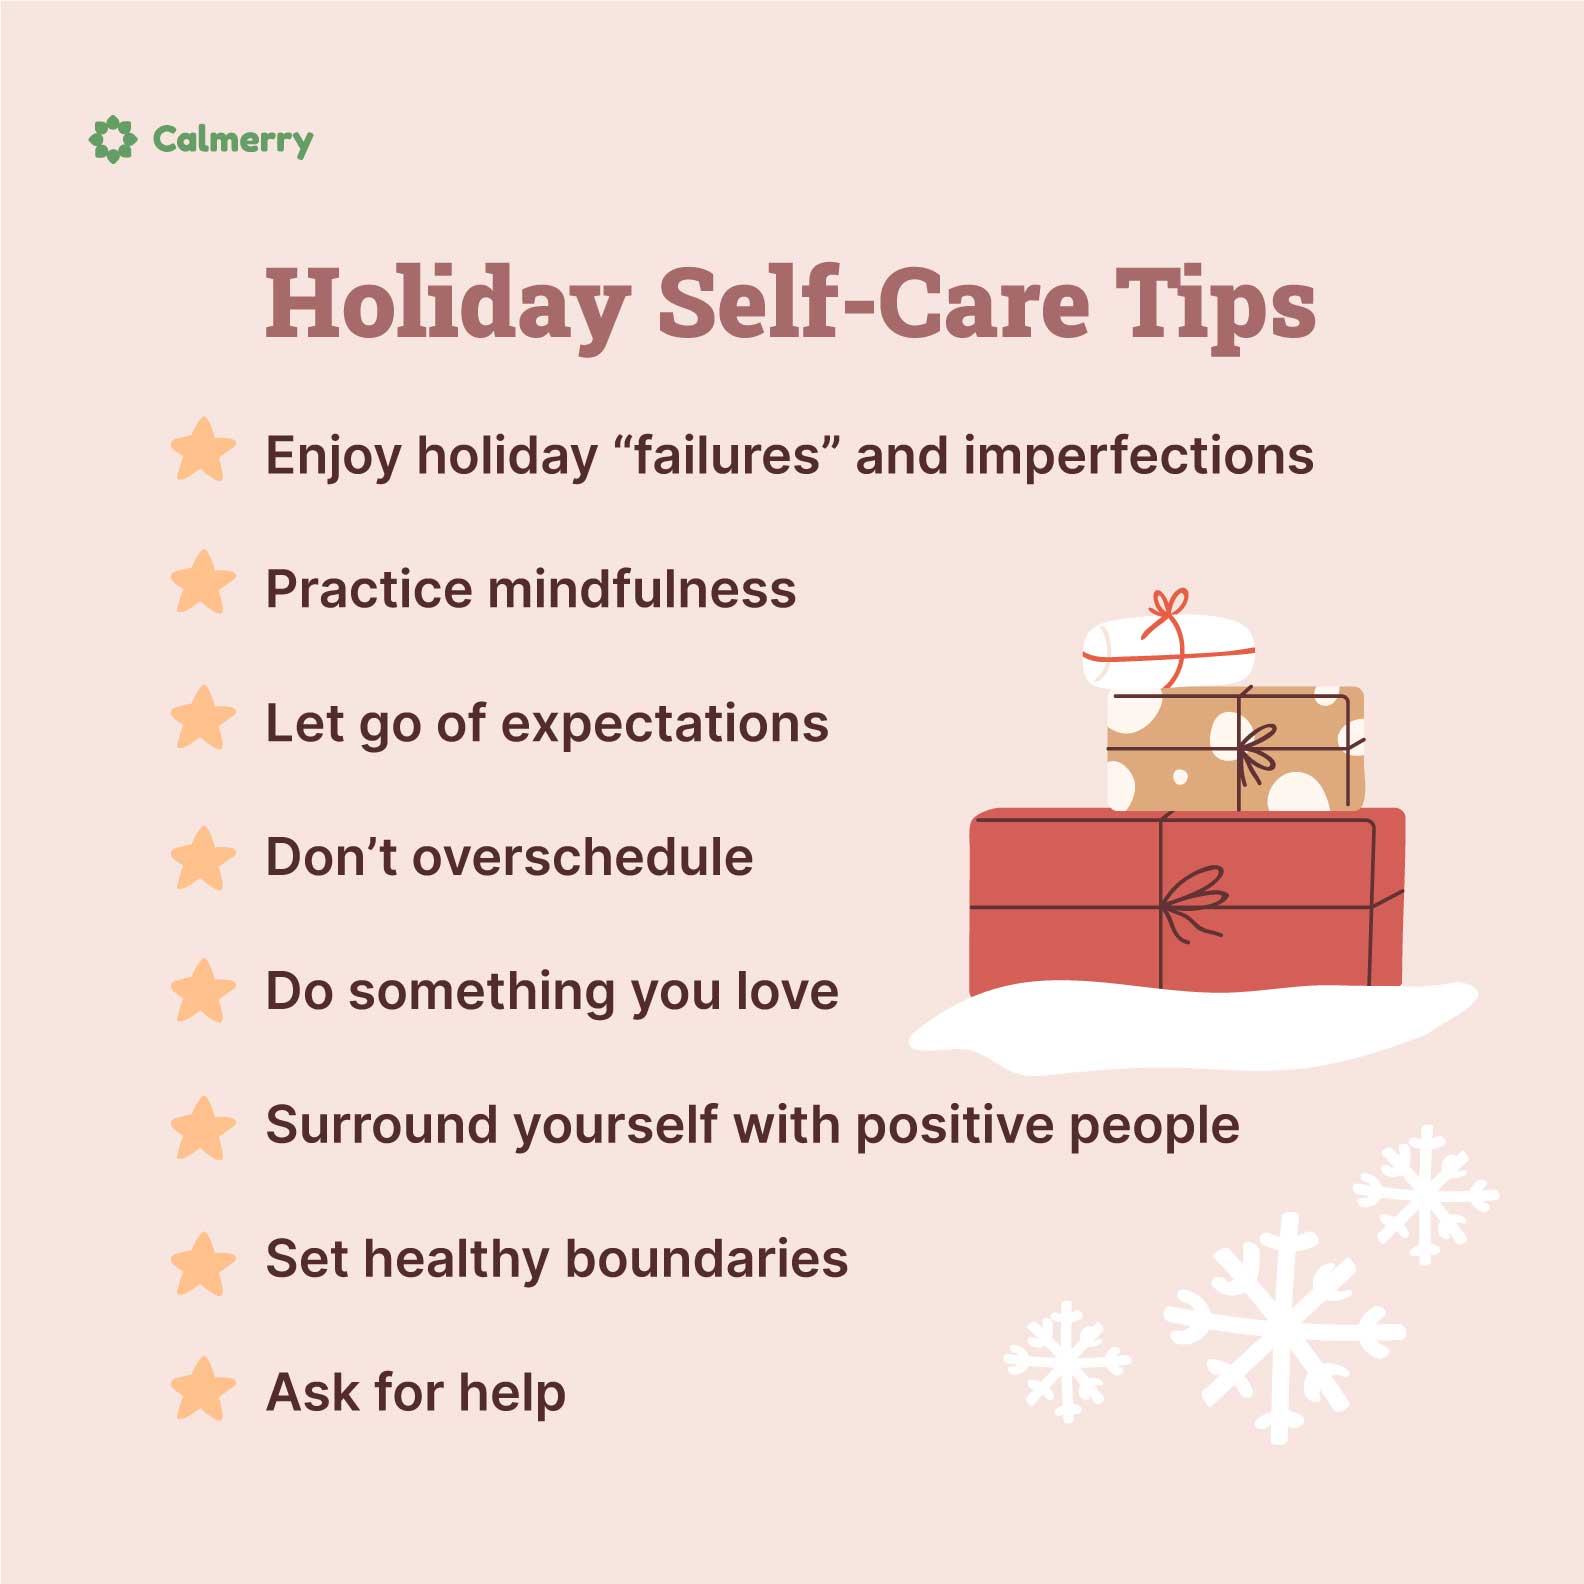 Holiday self-care tips list